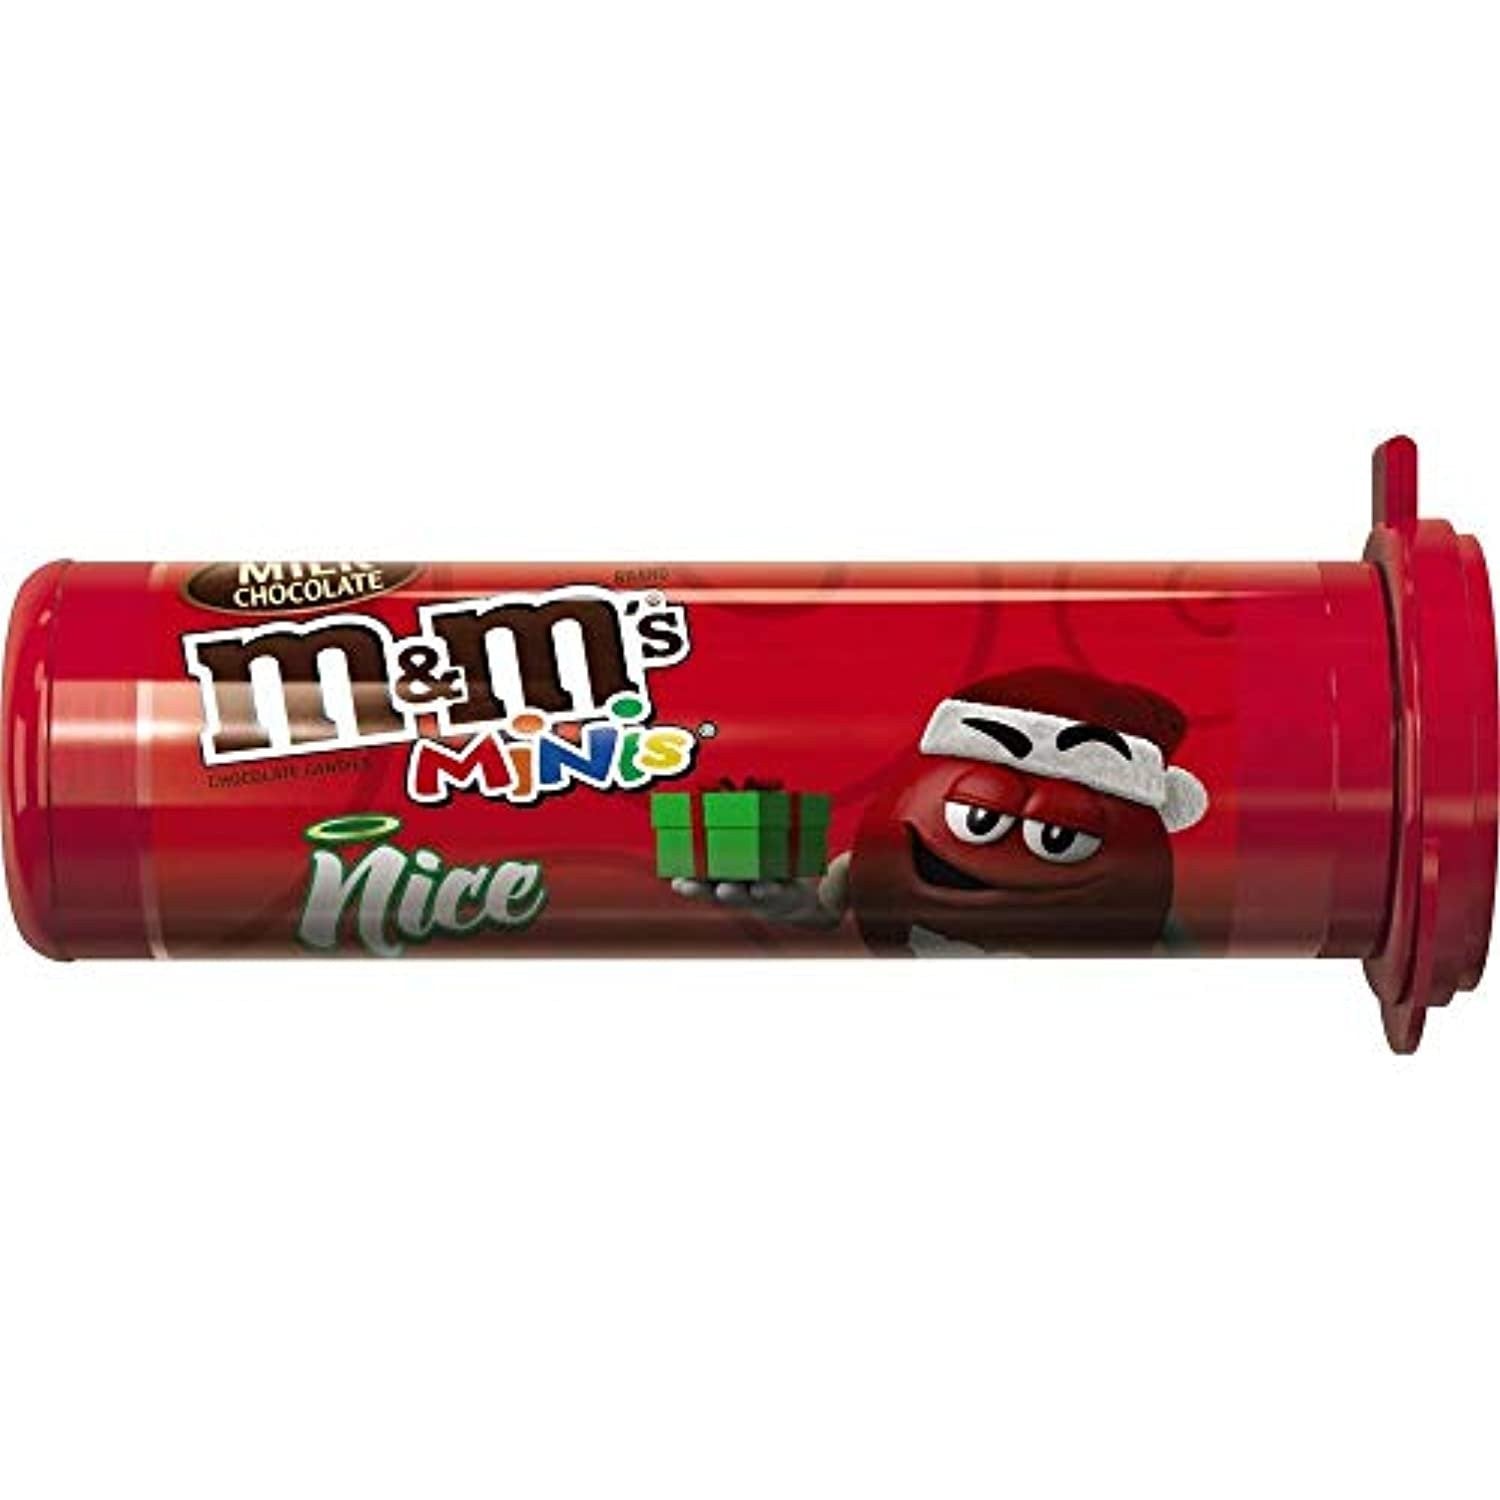 Bulk M&M'S MINIS Milk Chocolate Candy, 1.08-Ounce Tubes (Pack of 24), 2  pack